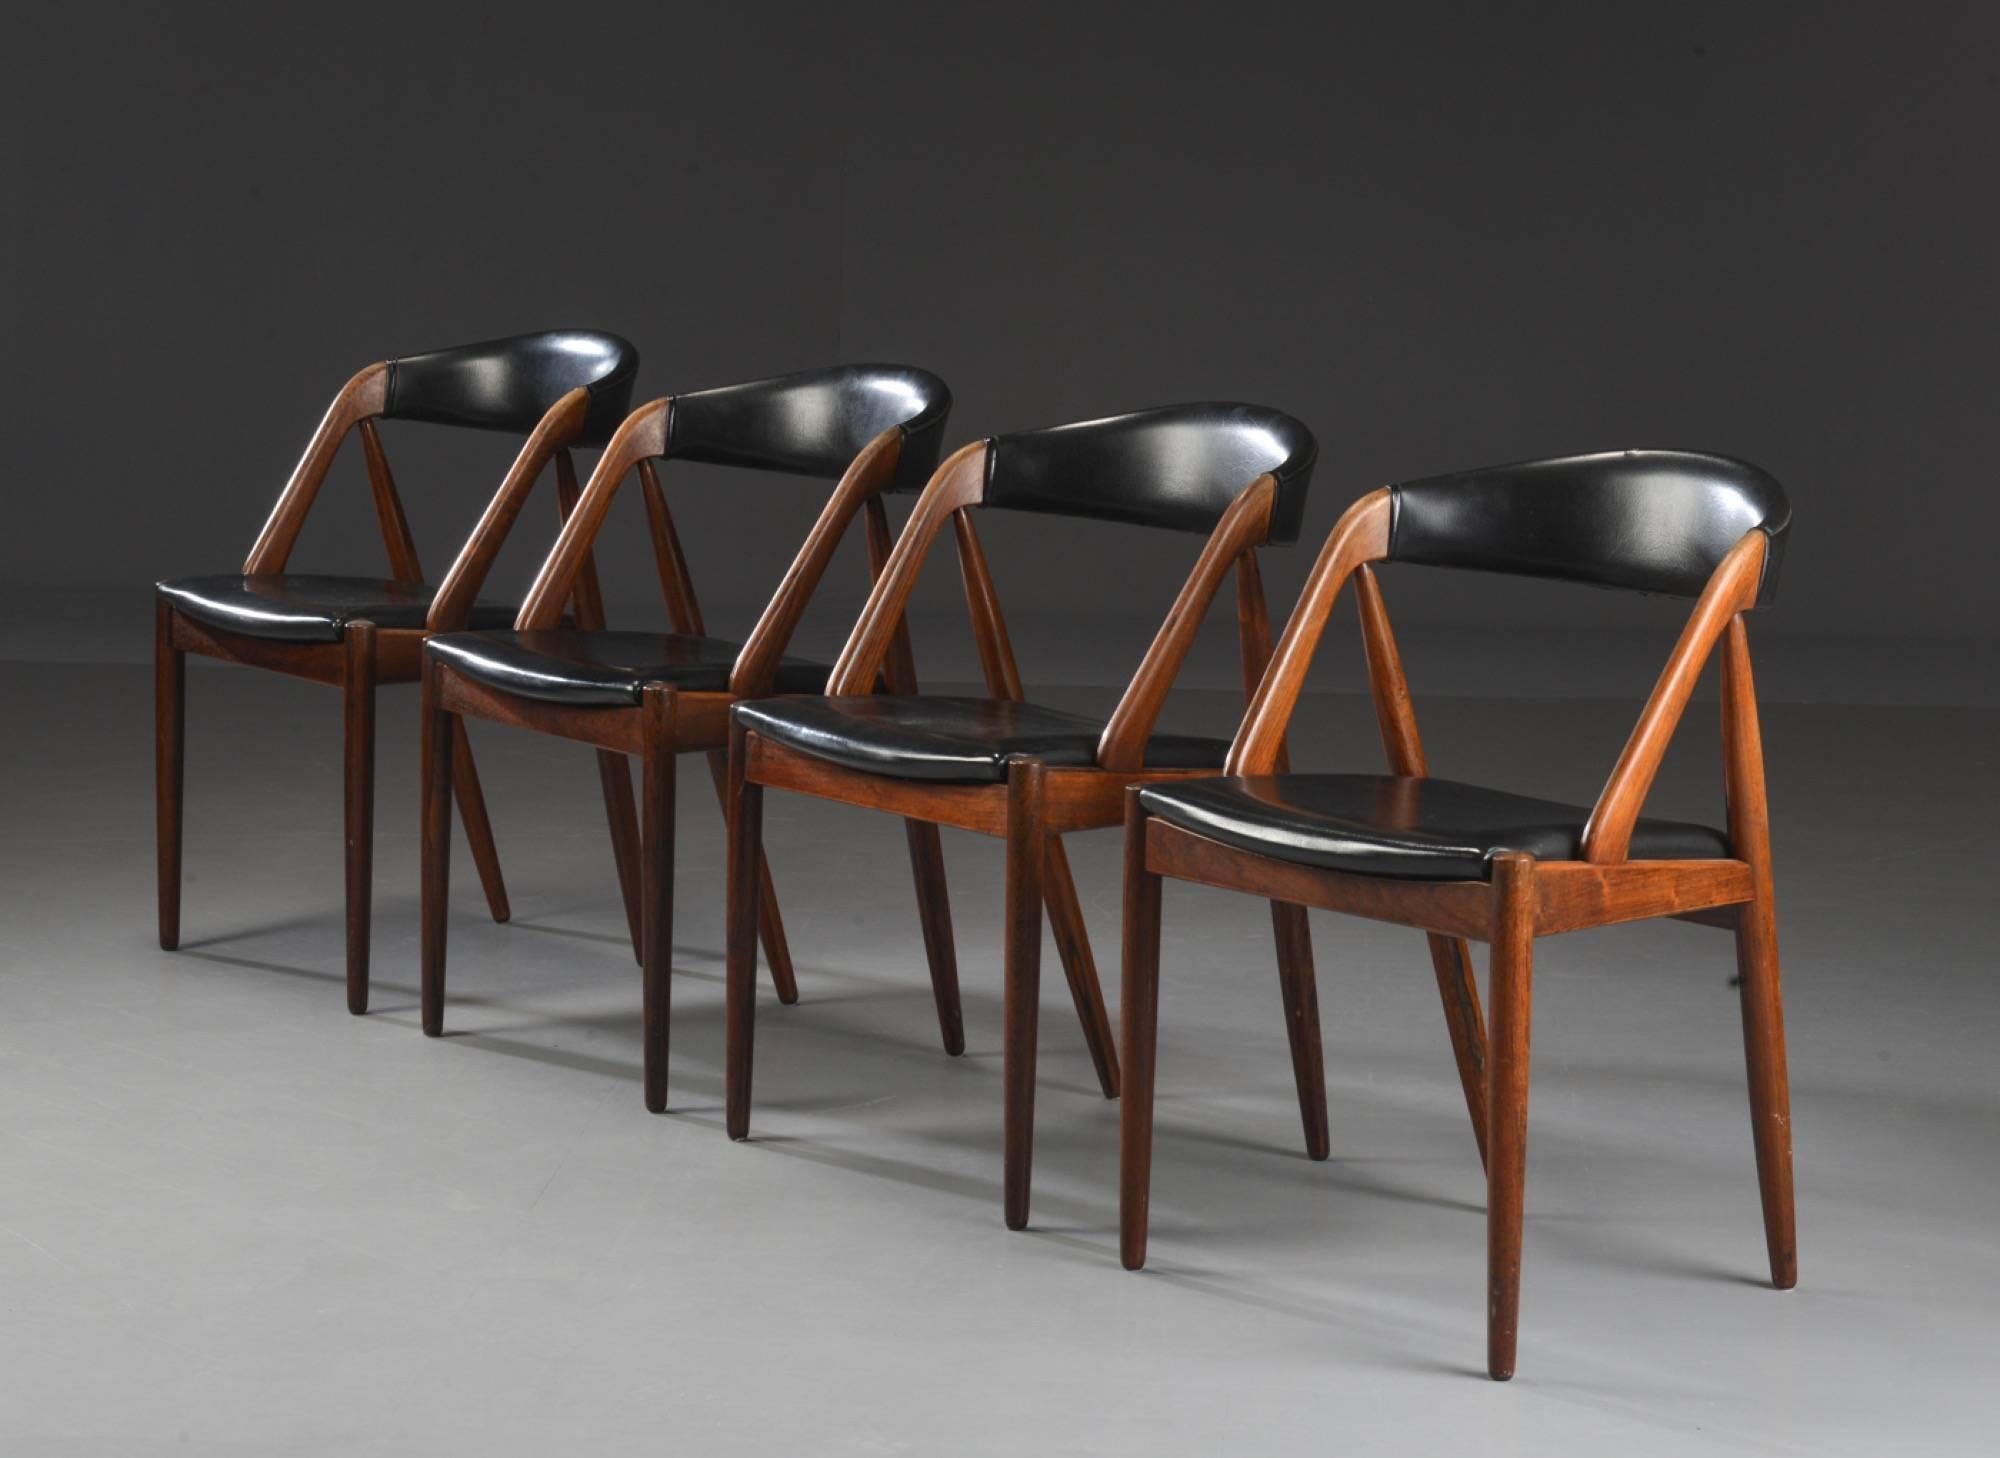 Set of four rosewood dining chairs by Kai Kristiansen, 1960. Rosewood chairs with tapered legs upholstered in black leather.